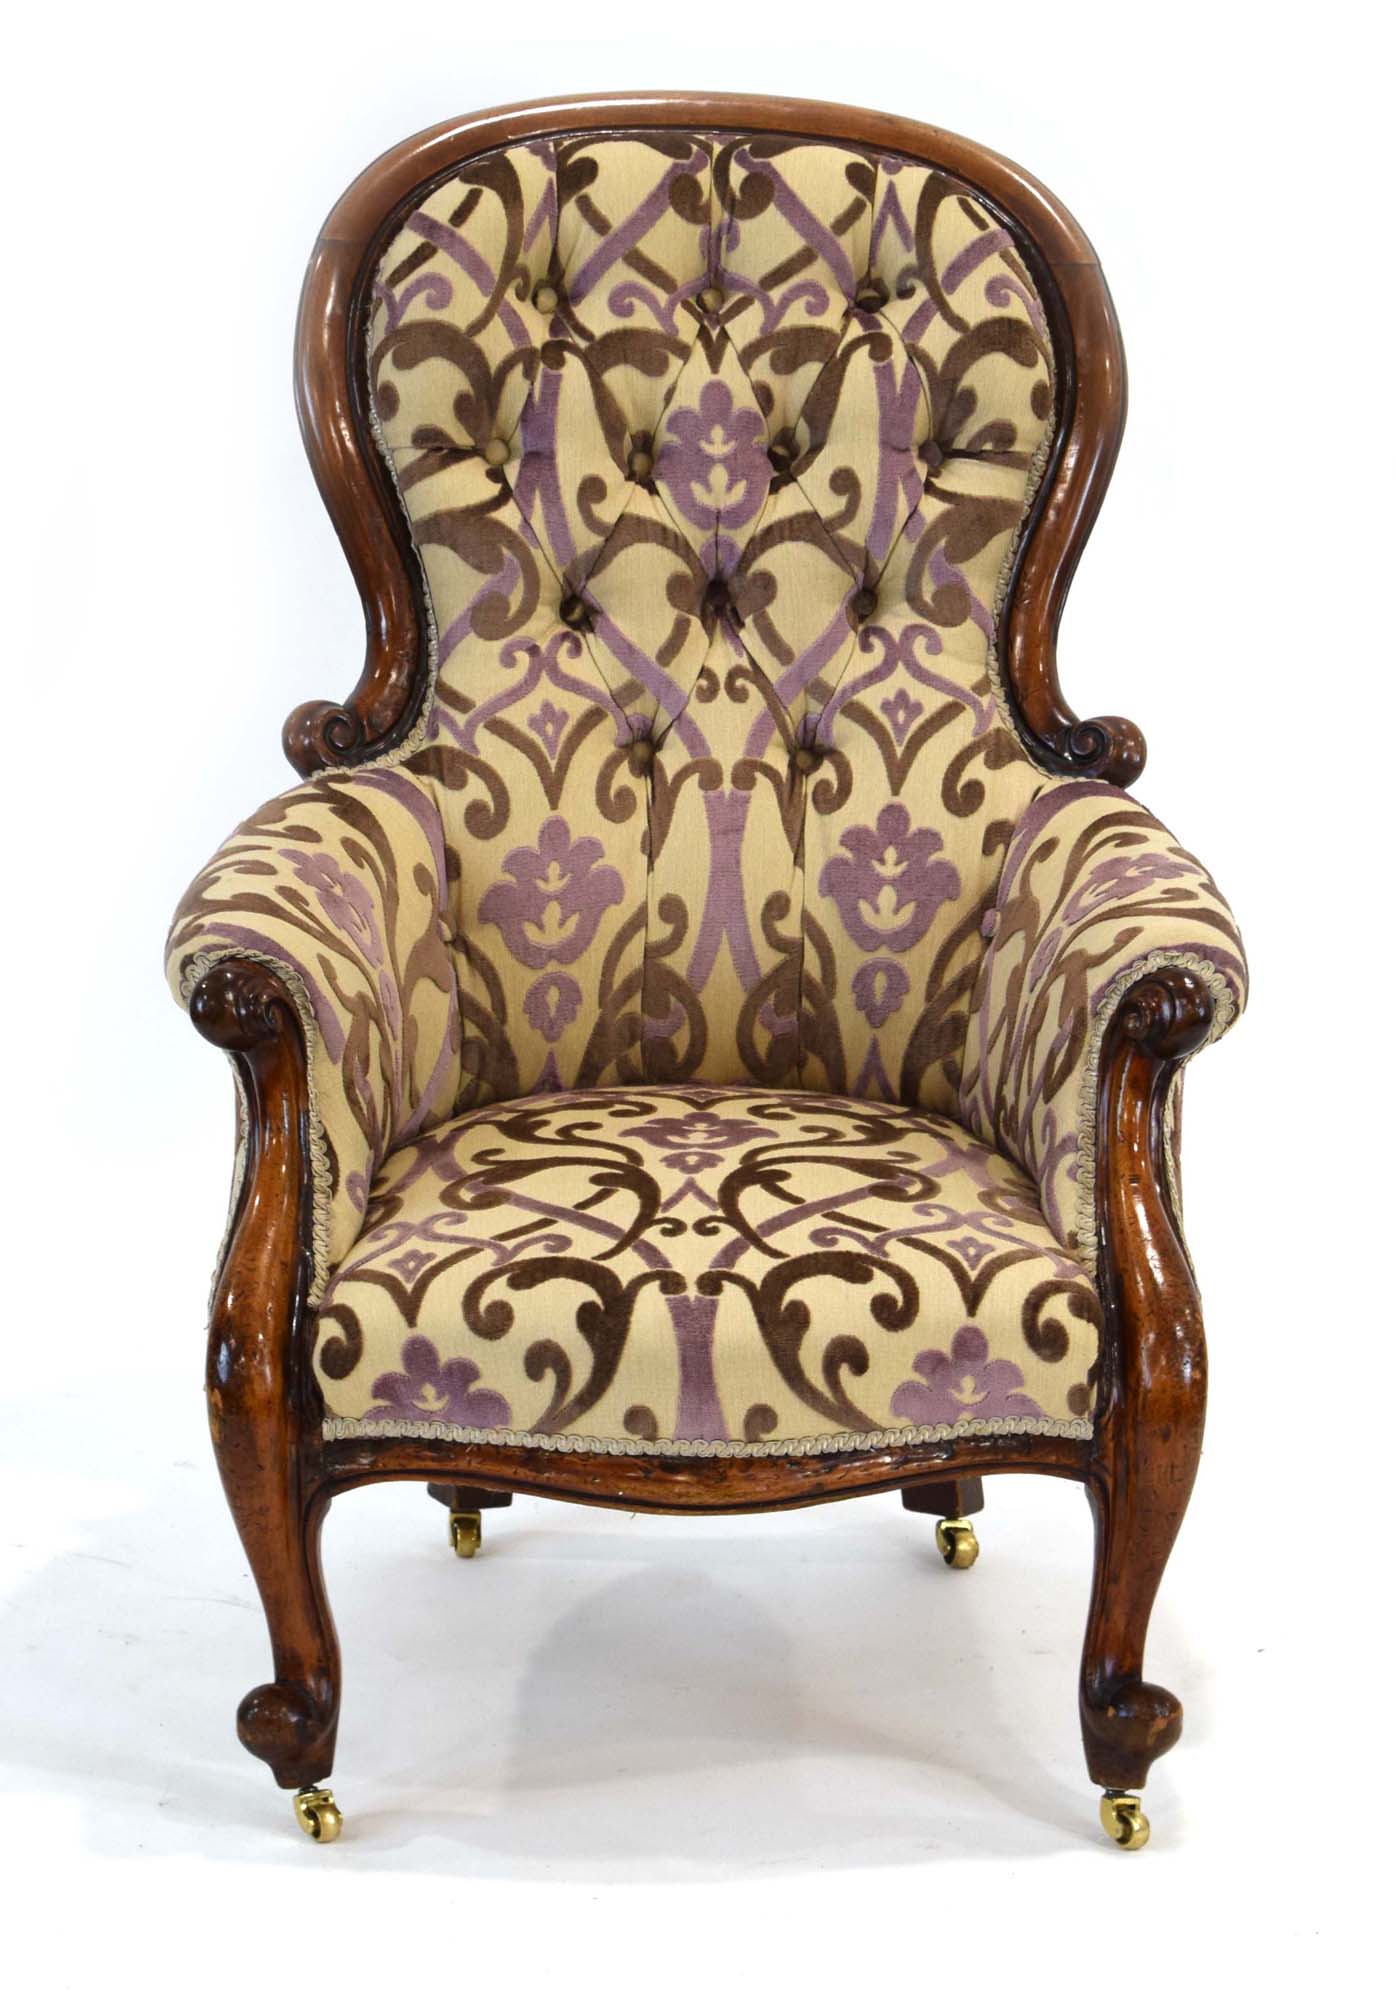 A Victorian mahogany and button upholstered armchair with scrolled front legs on castors